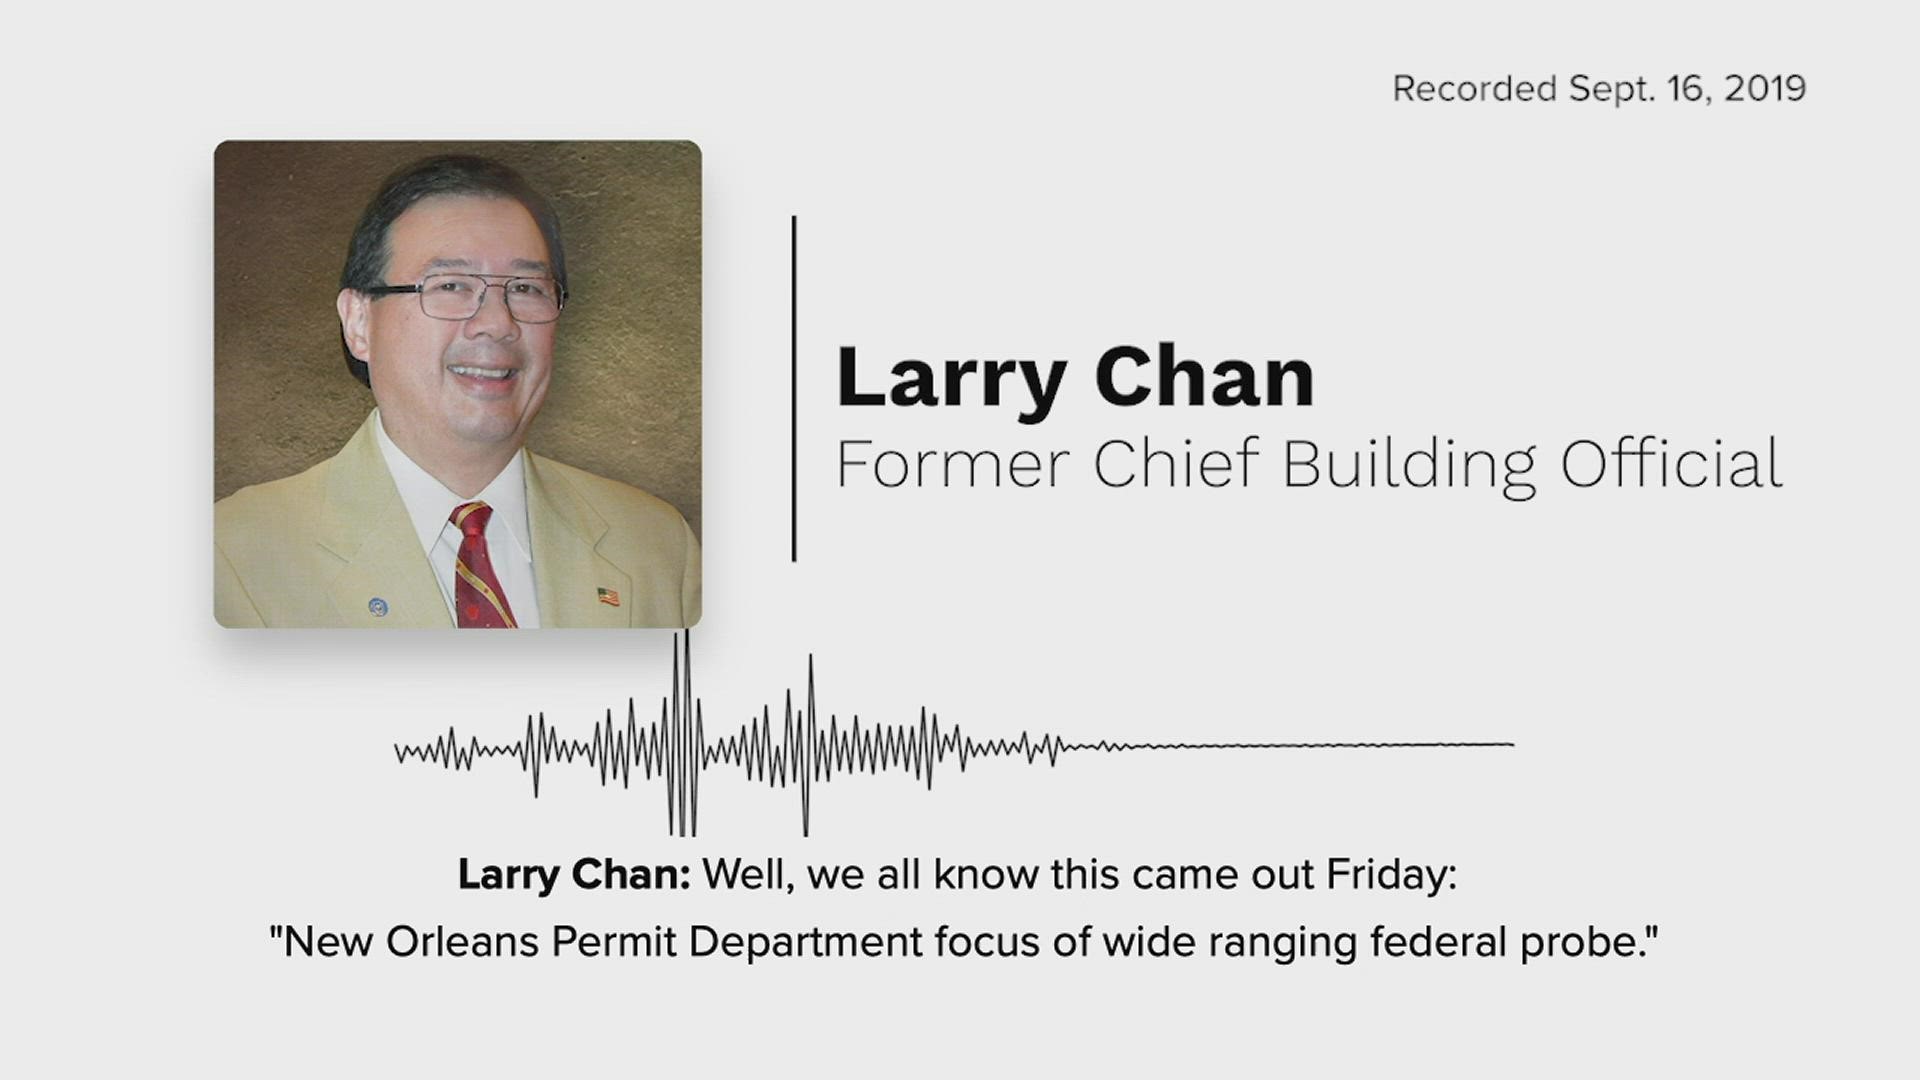 Listen to excerpts from the meeting called by then-chief building official Larry Chan, who begins the meeting by talking about a WWL-TV story.